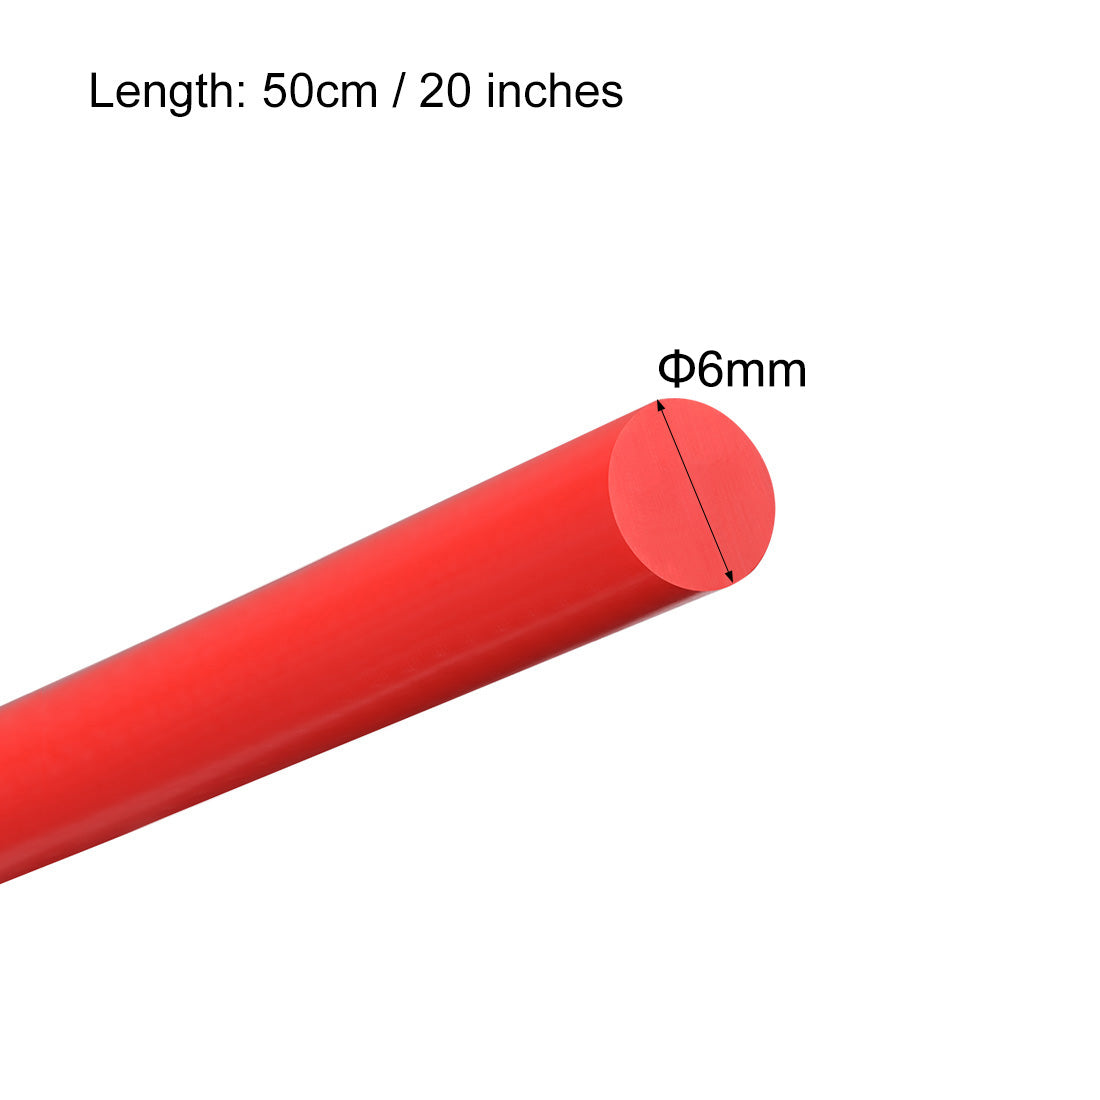 uxcell Uxcell Plastic Round Rod,6mm Dia 50cm Red Engineering Plastic Round Bar 2pcs